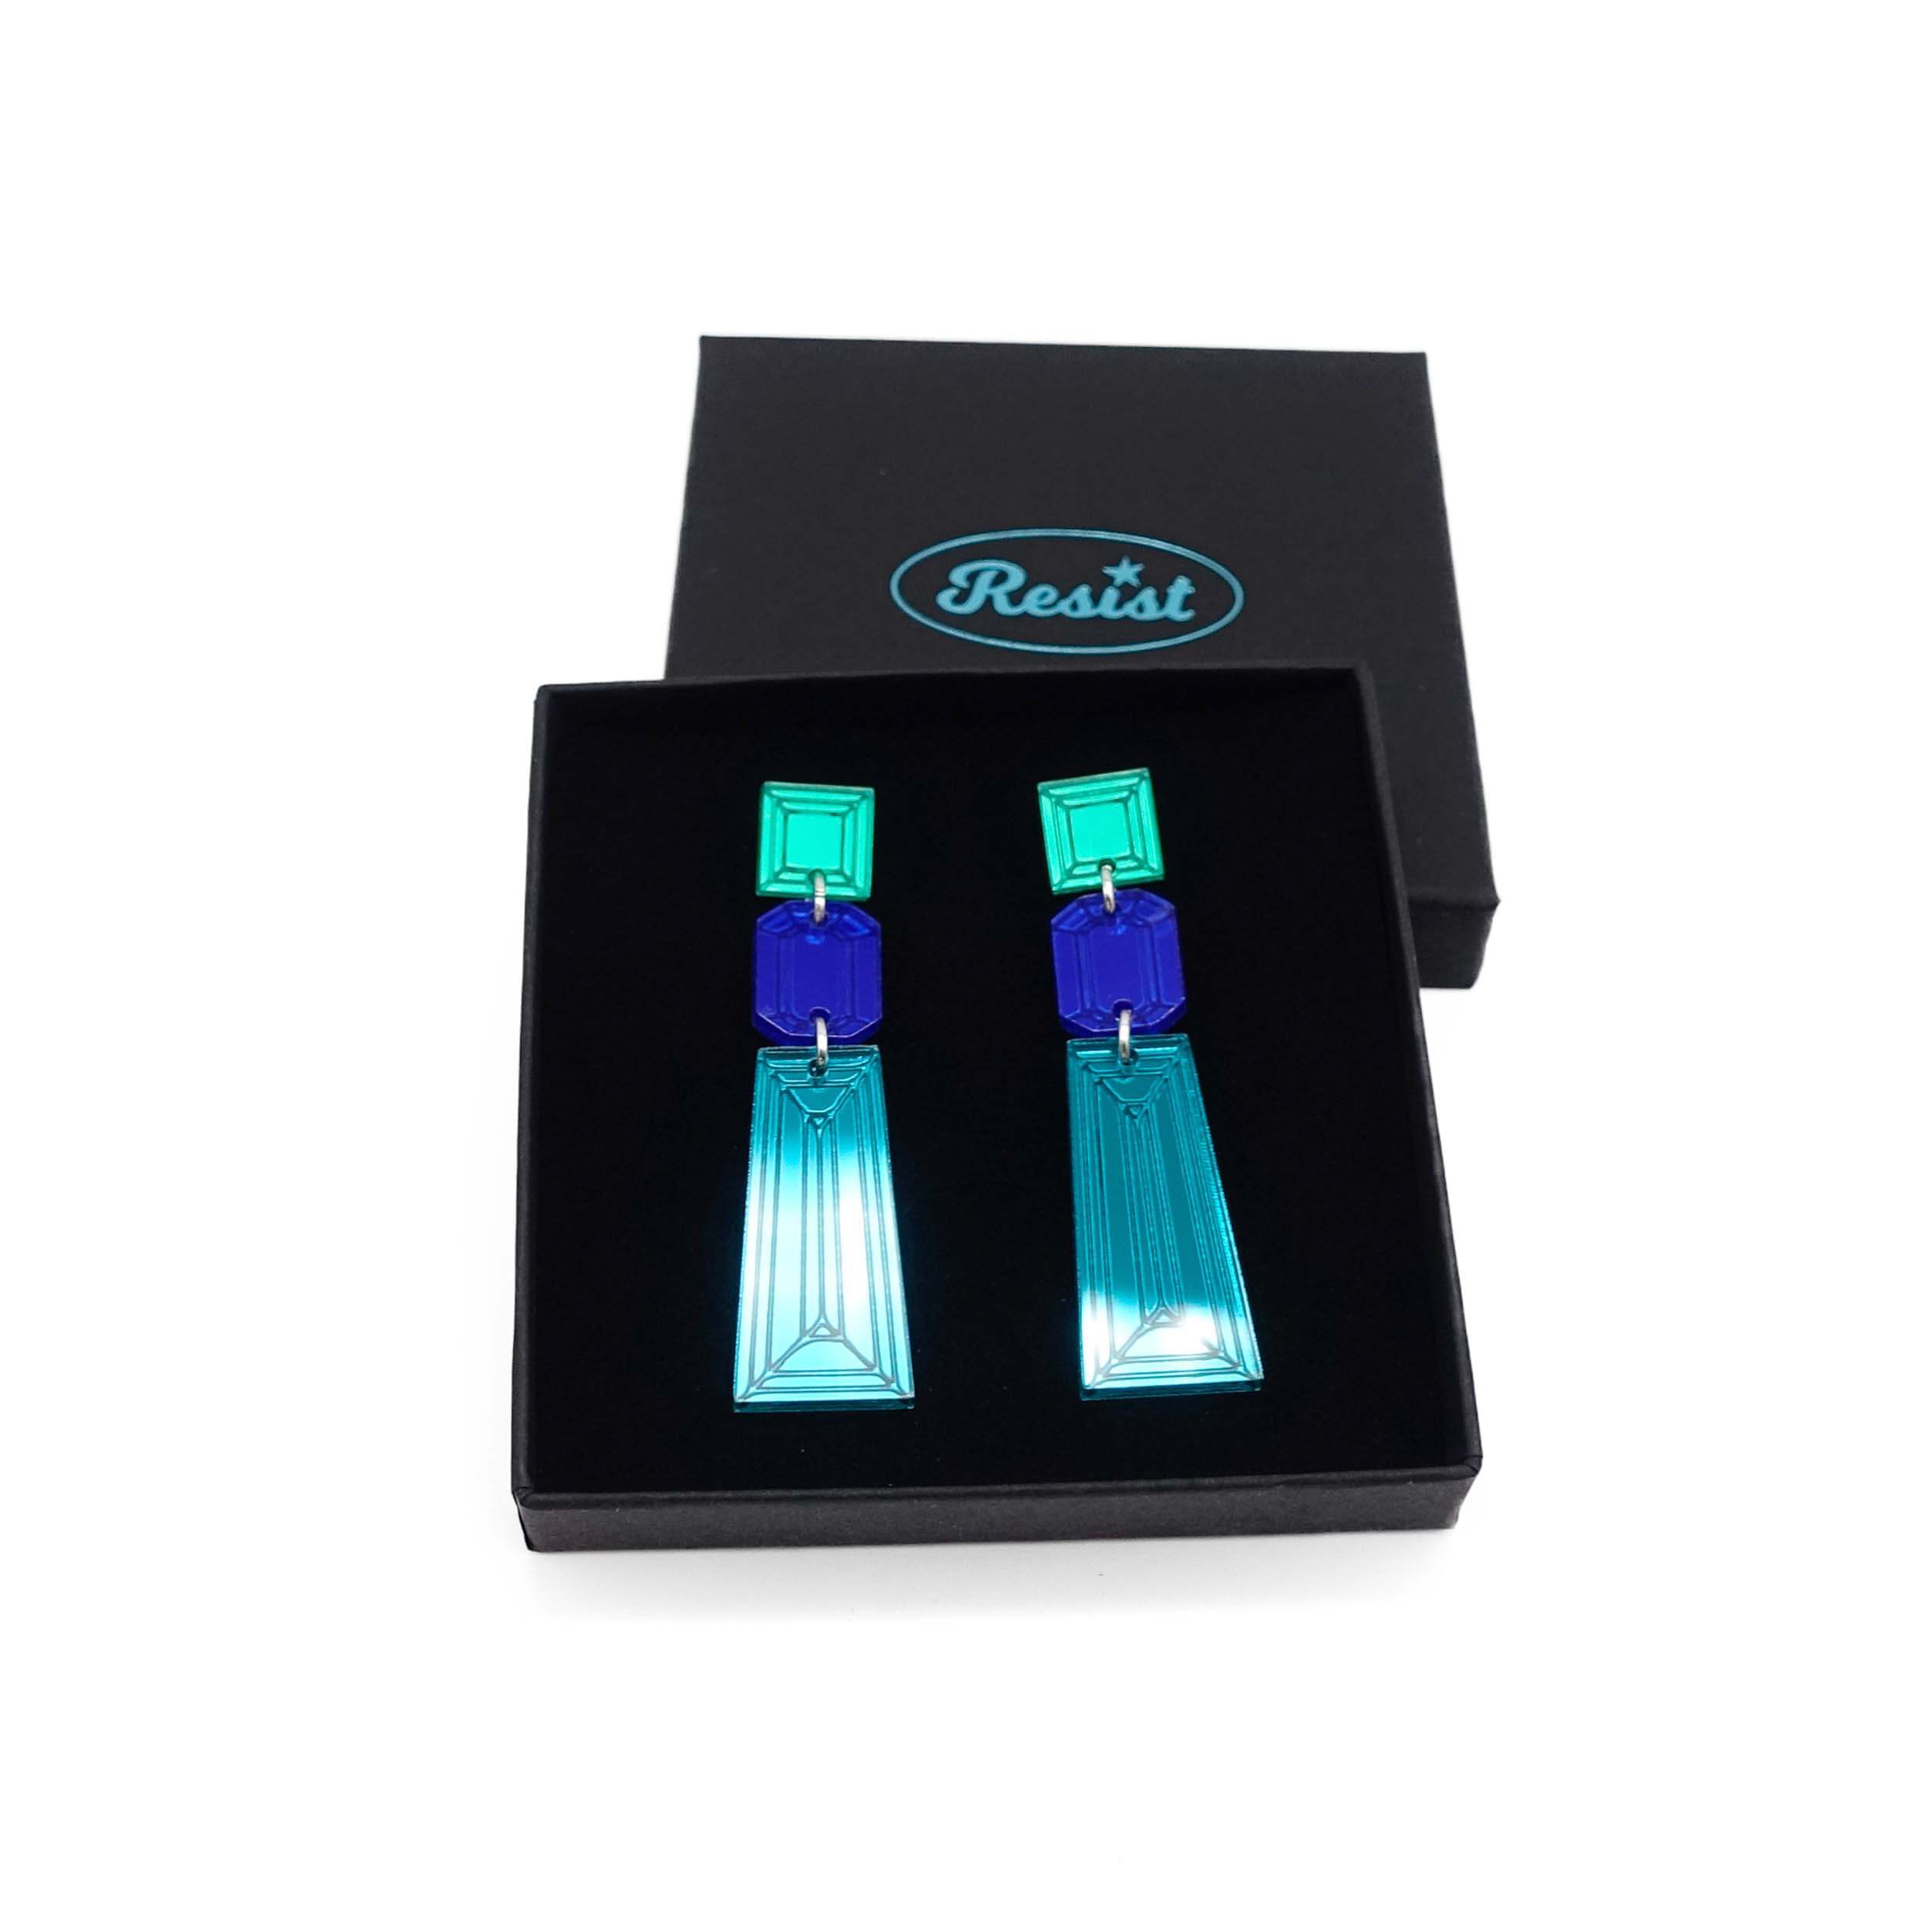 Long Deco drop earrings in teal, electric blue and electric green mirror shown in a Wear and Resist gift box. 